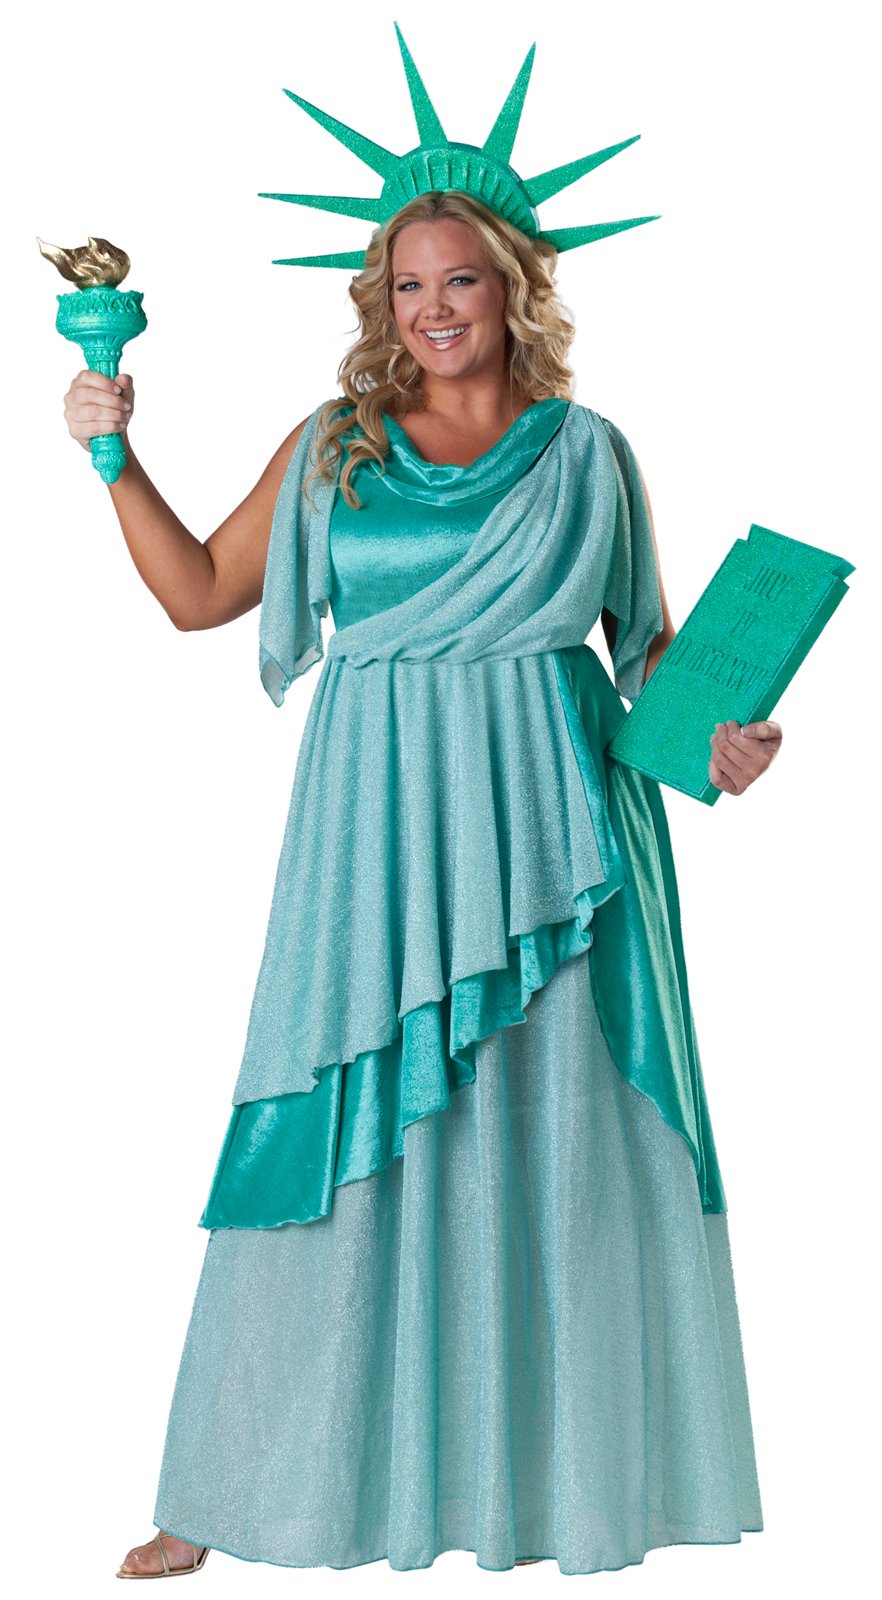 Statue Of Liberty Costumes